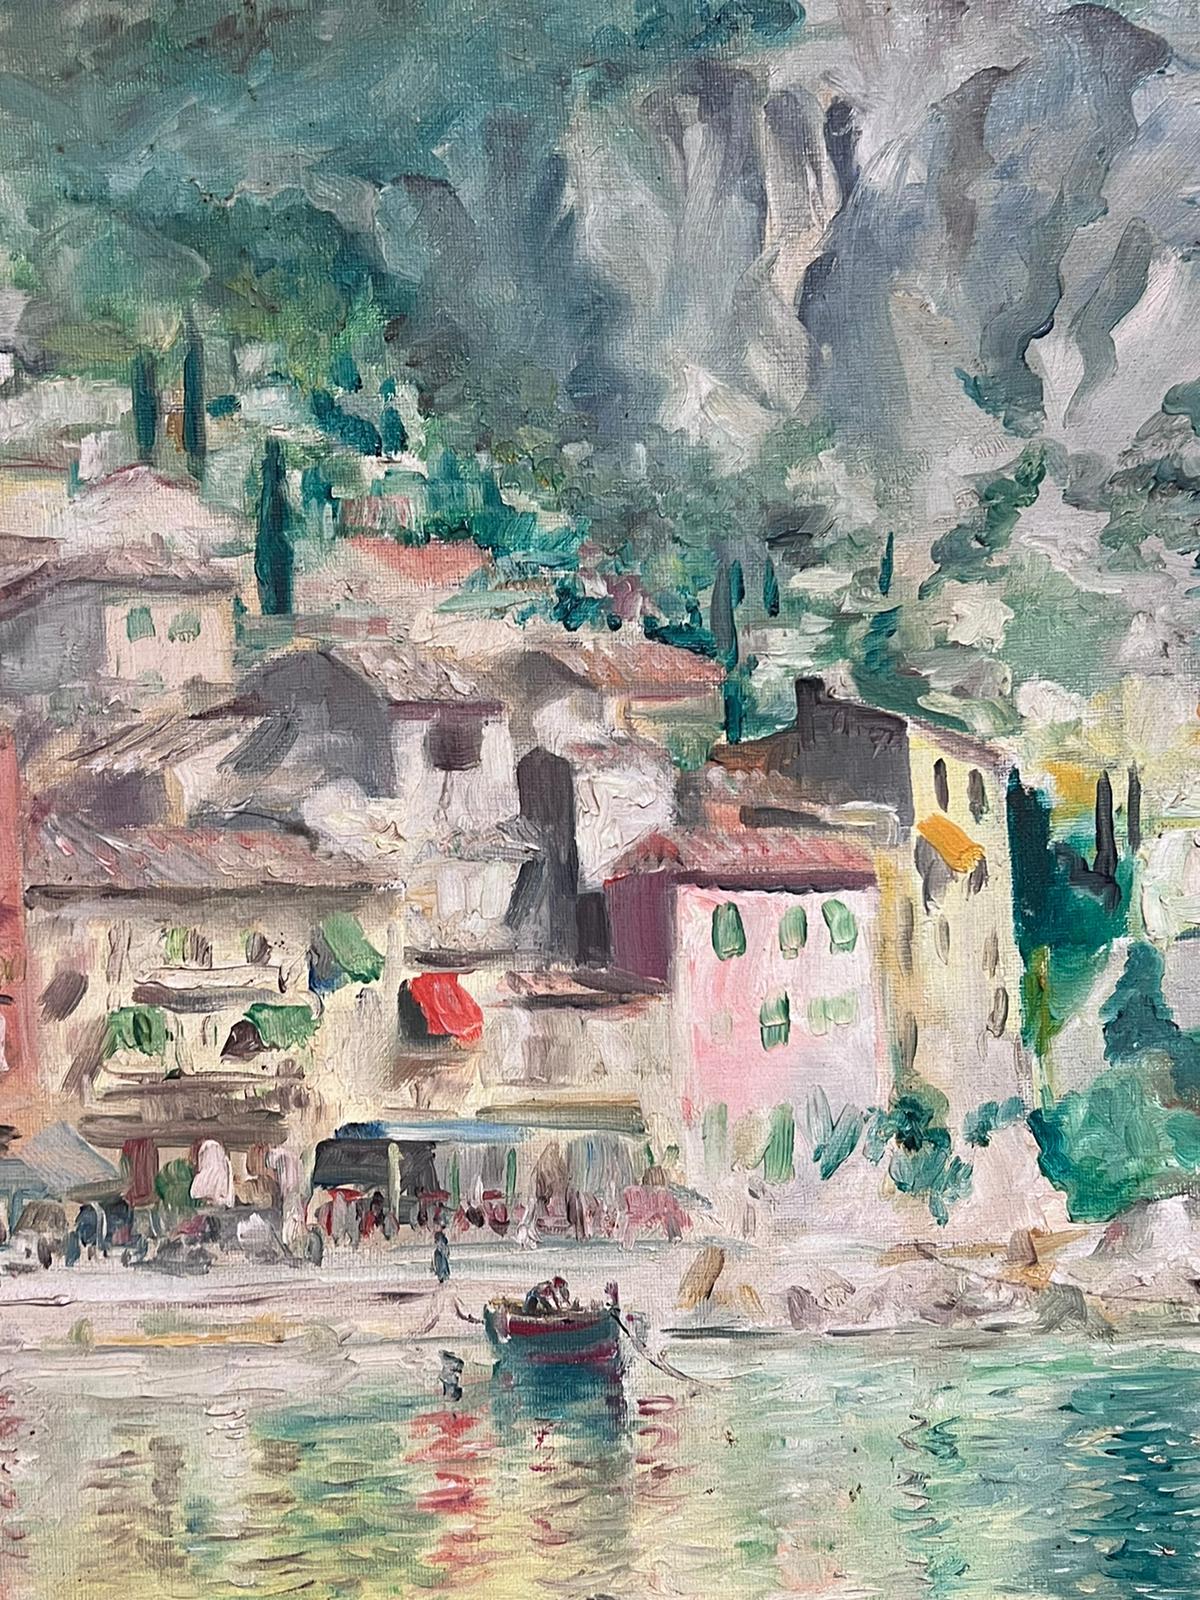 The Italian Riviera
Italian impressionist artist, mid 20th century
signed oil on canvas, unframed
canvas: 24 x 20 inches
provenance: private collection, France
condition: a few minor scuffs but overall good and sound condition 